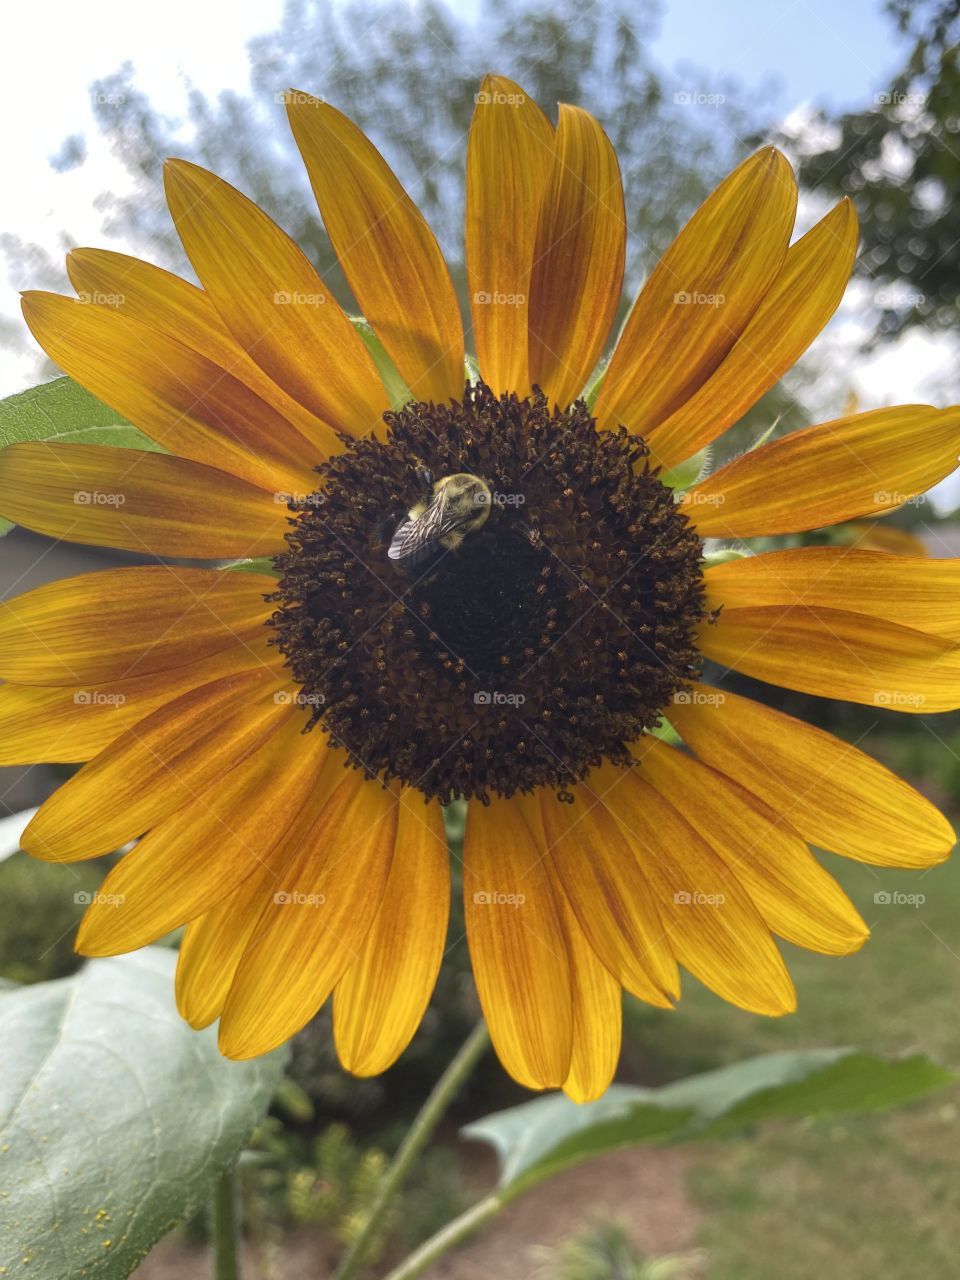 Autumn Sunflower grown from seed in full bloom attracting a bumble bee to pollinate 